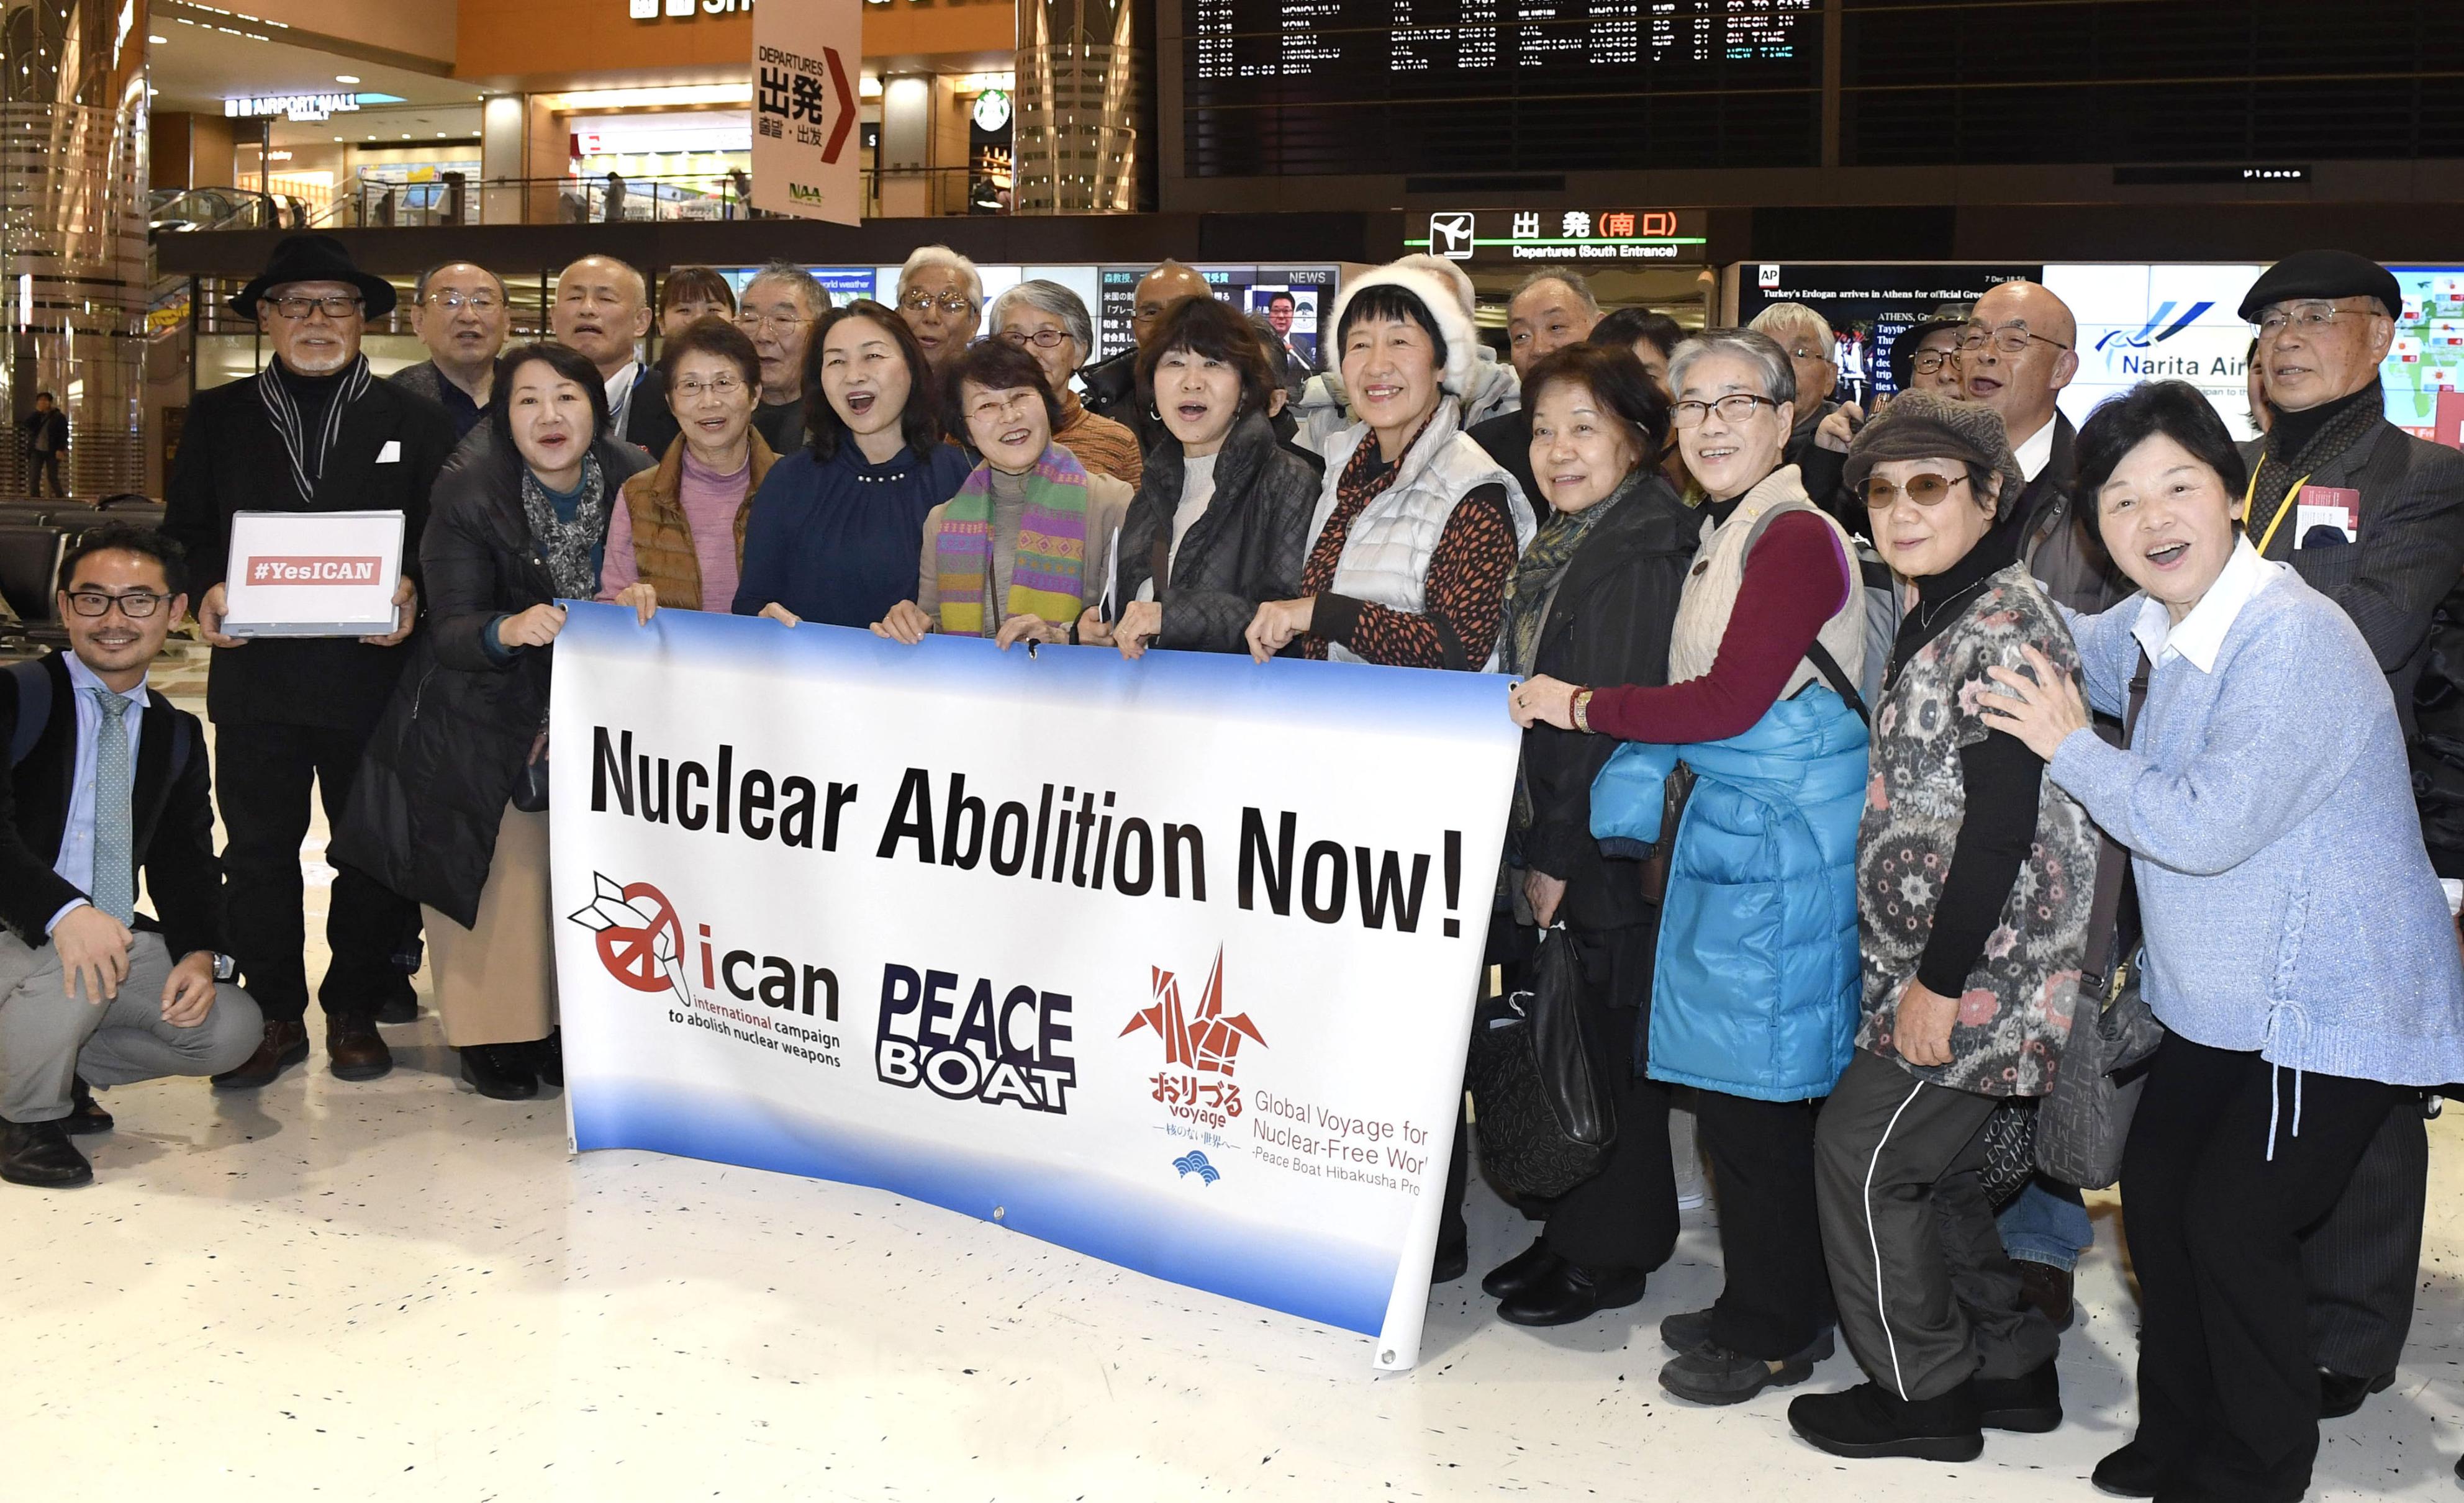 Survivors of the 1945 U.S. atomic bombings of Hiroshima and Nagasaki among others pose for photos at Narita airport near Tokyo on Dec. 7, 2017, before leaving for Oslo where the Nobel Peace Prize Award Ceremony will be held on Dec. 10. (Kyodo)
==Kyodo